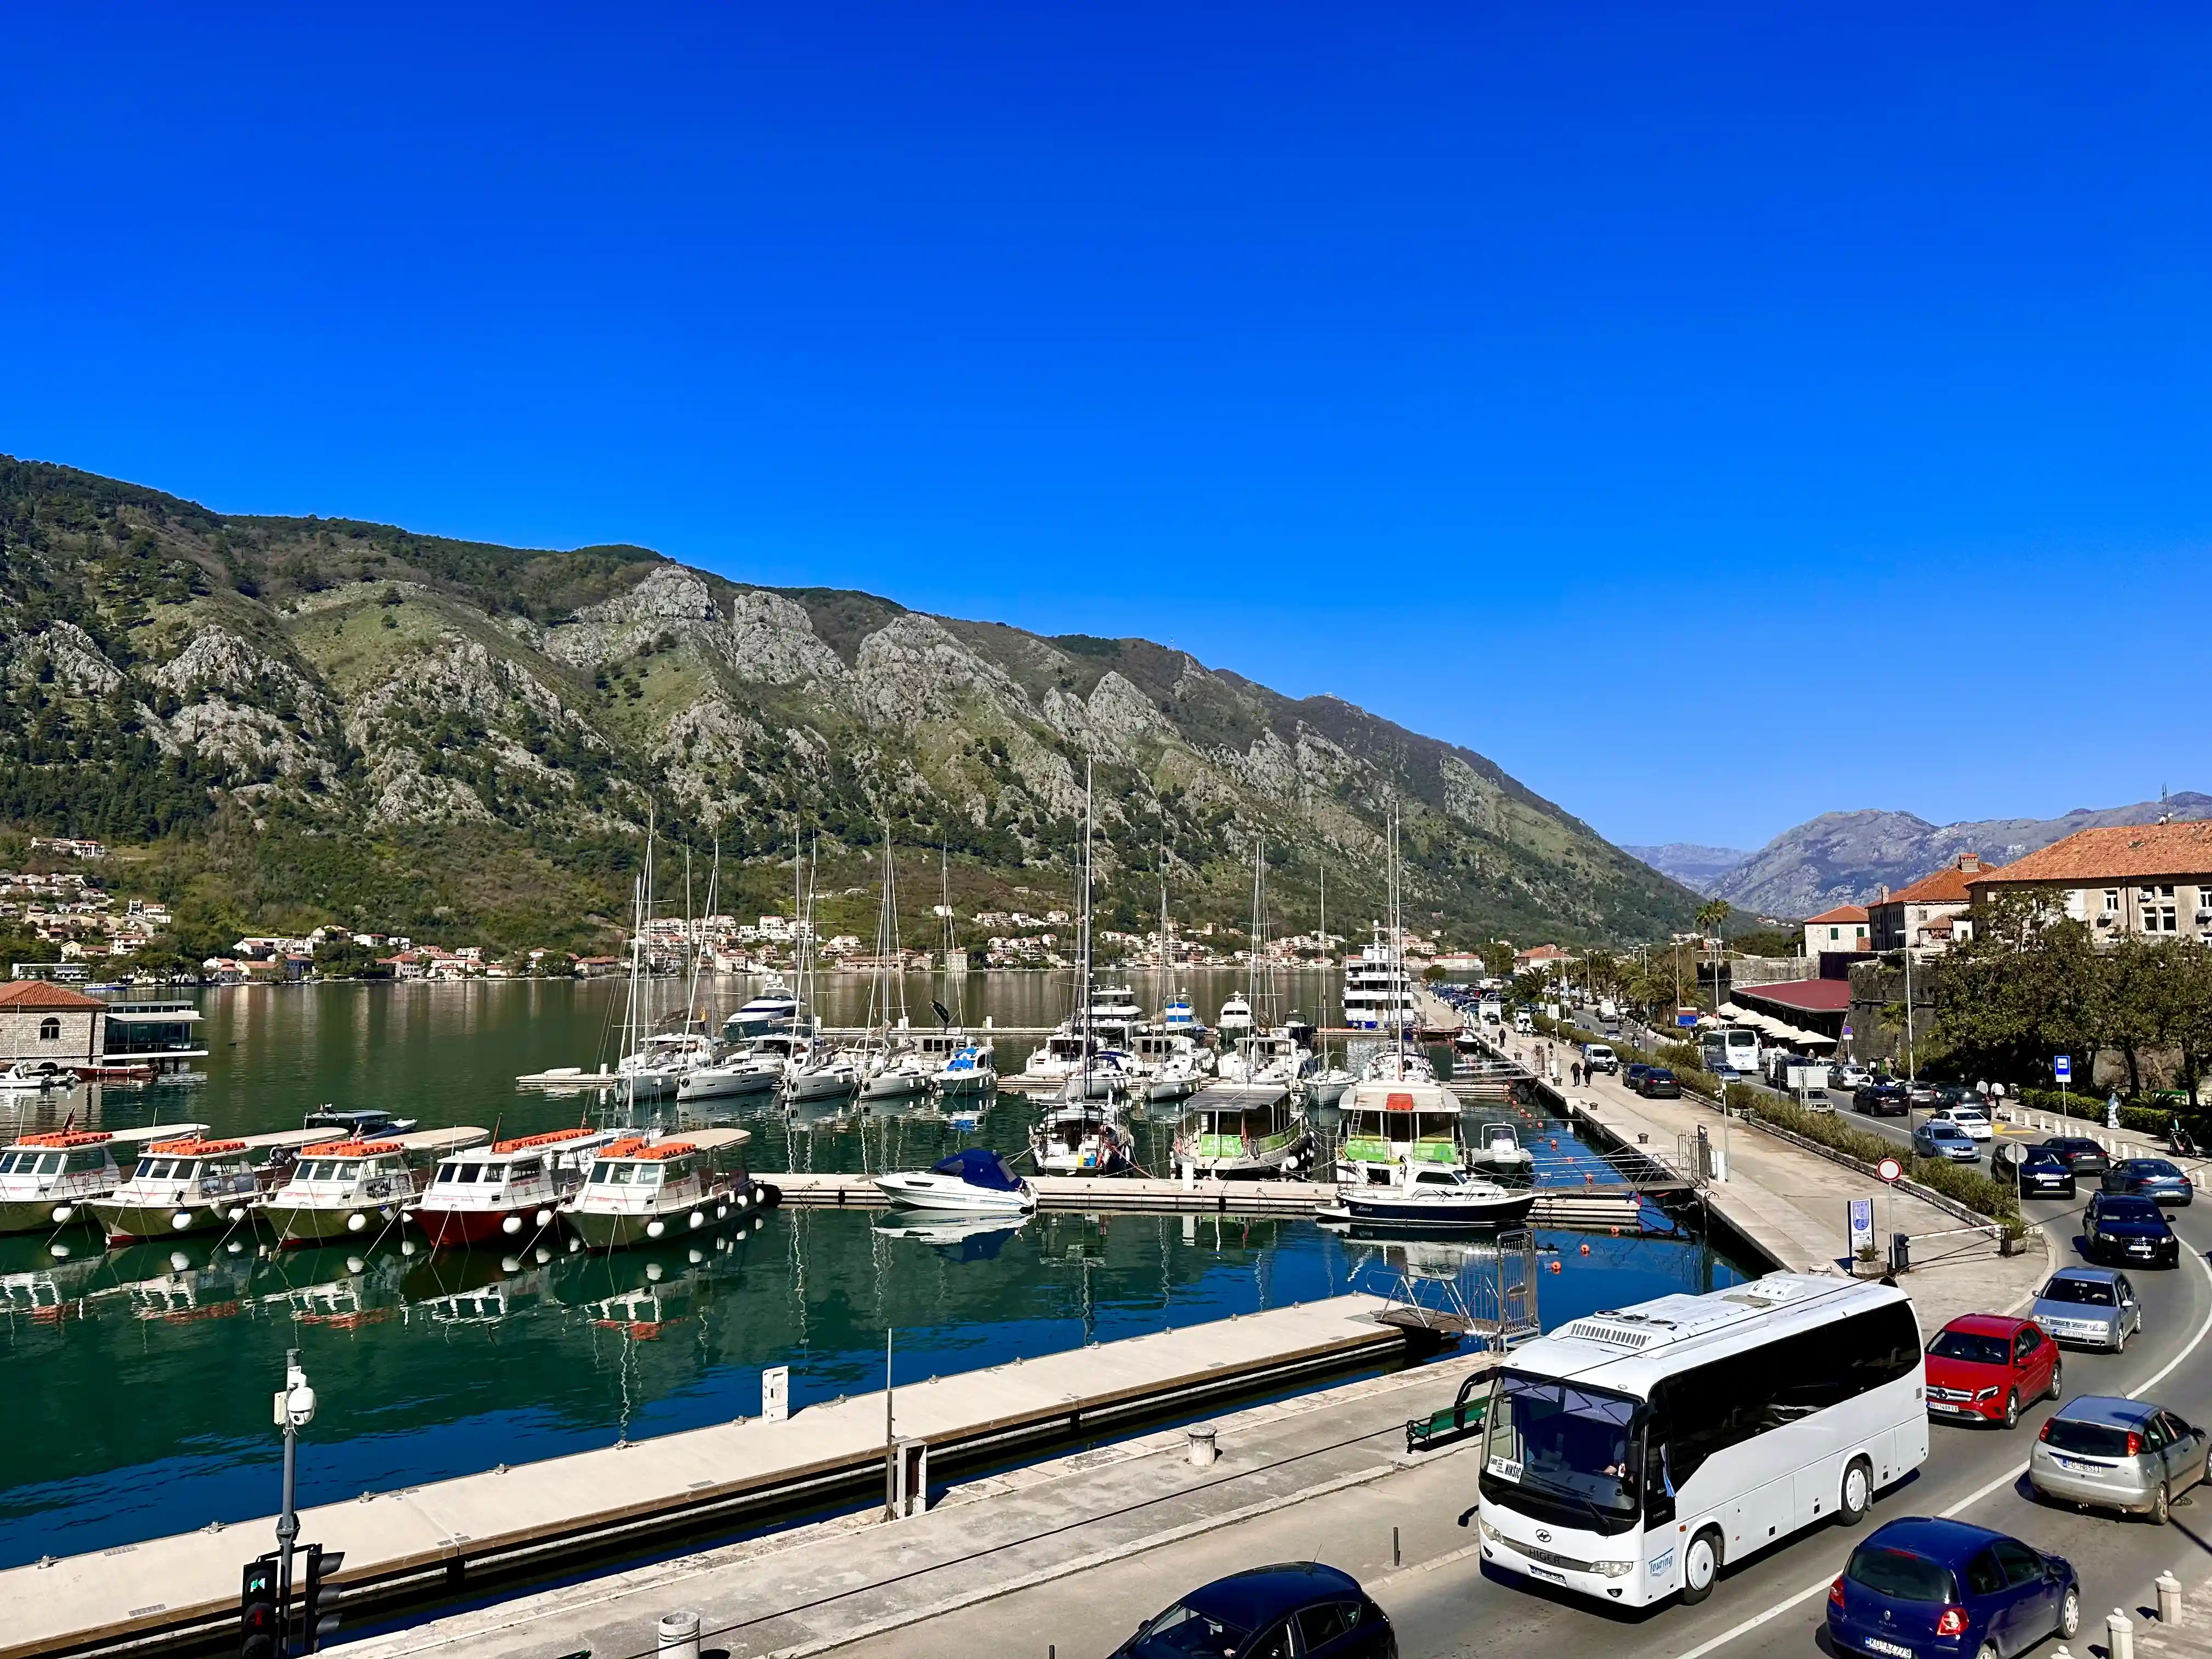 Imagine Is Kotor Montenegro safe for tourists? in Kotor